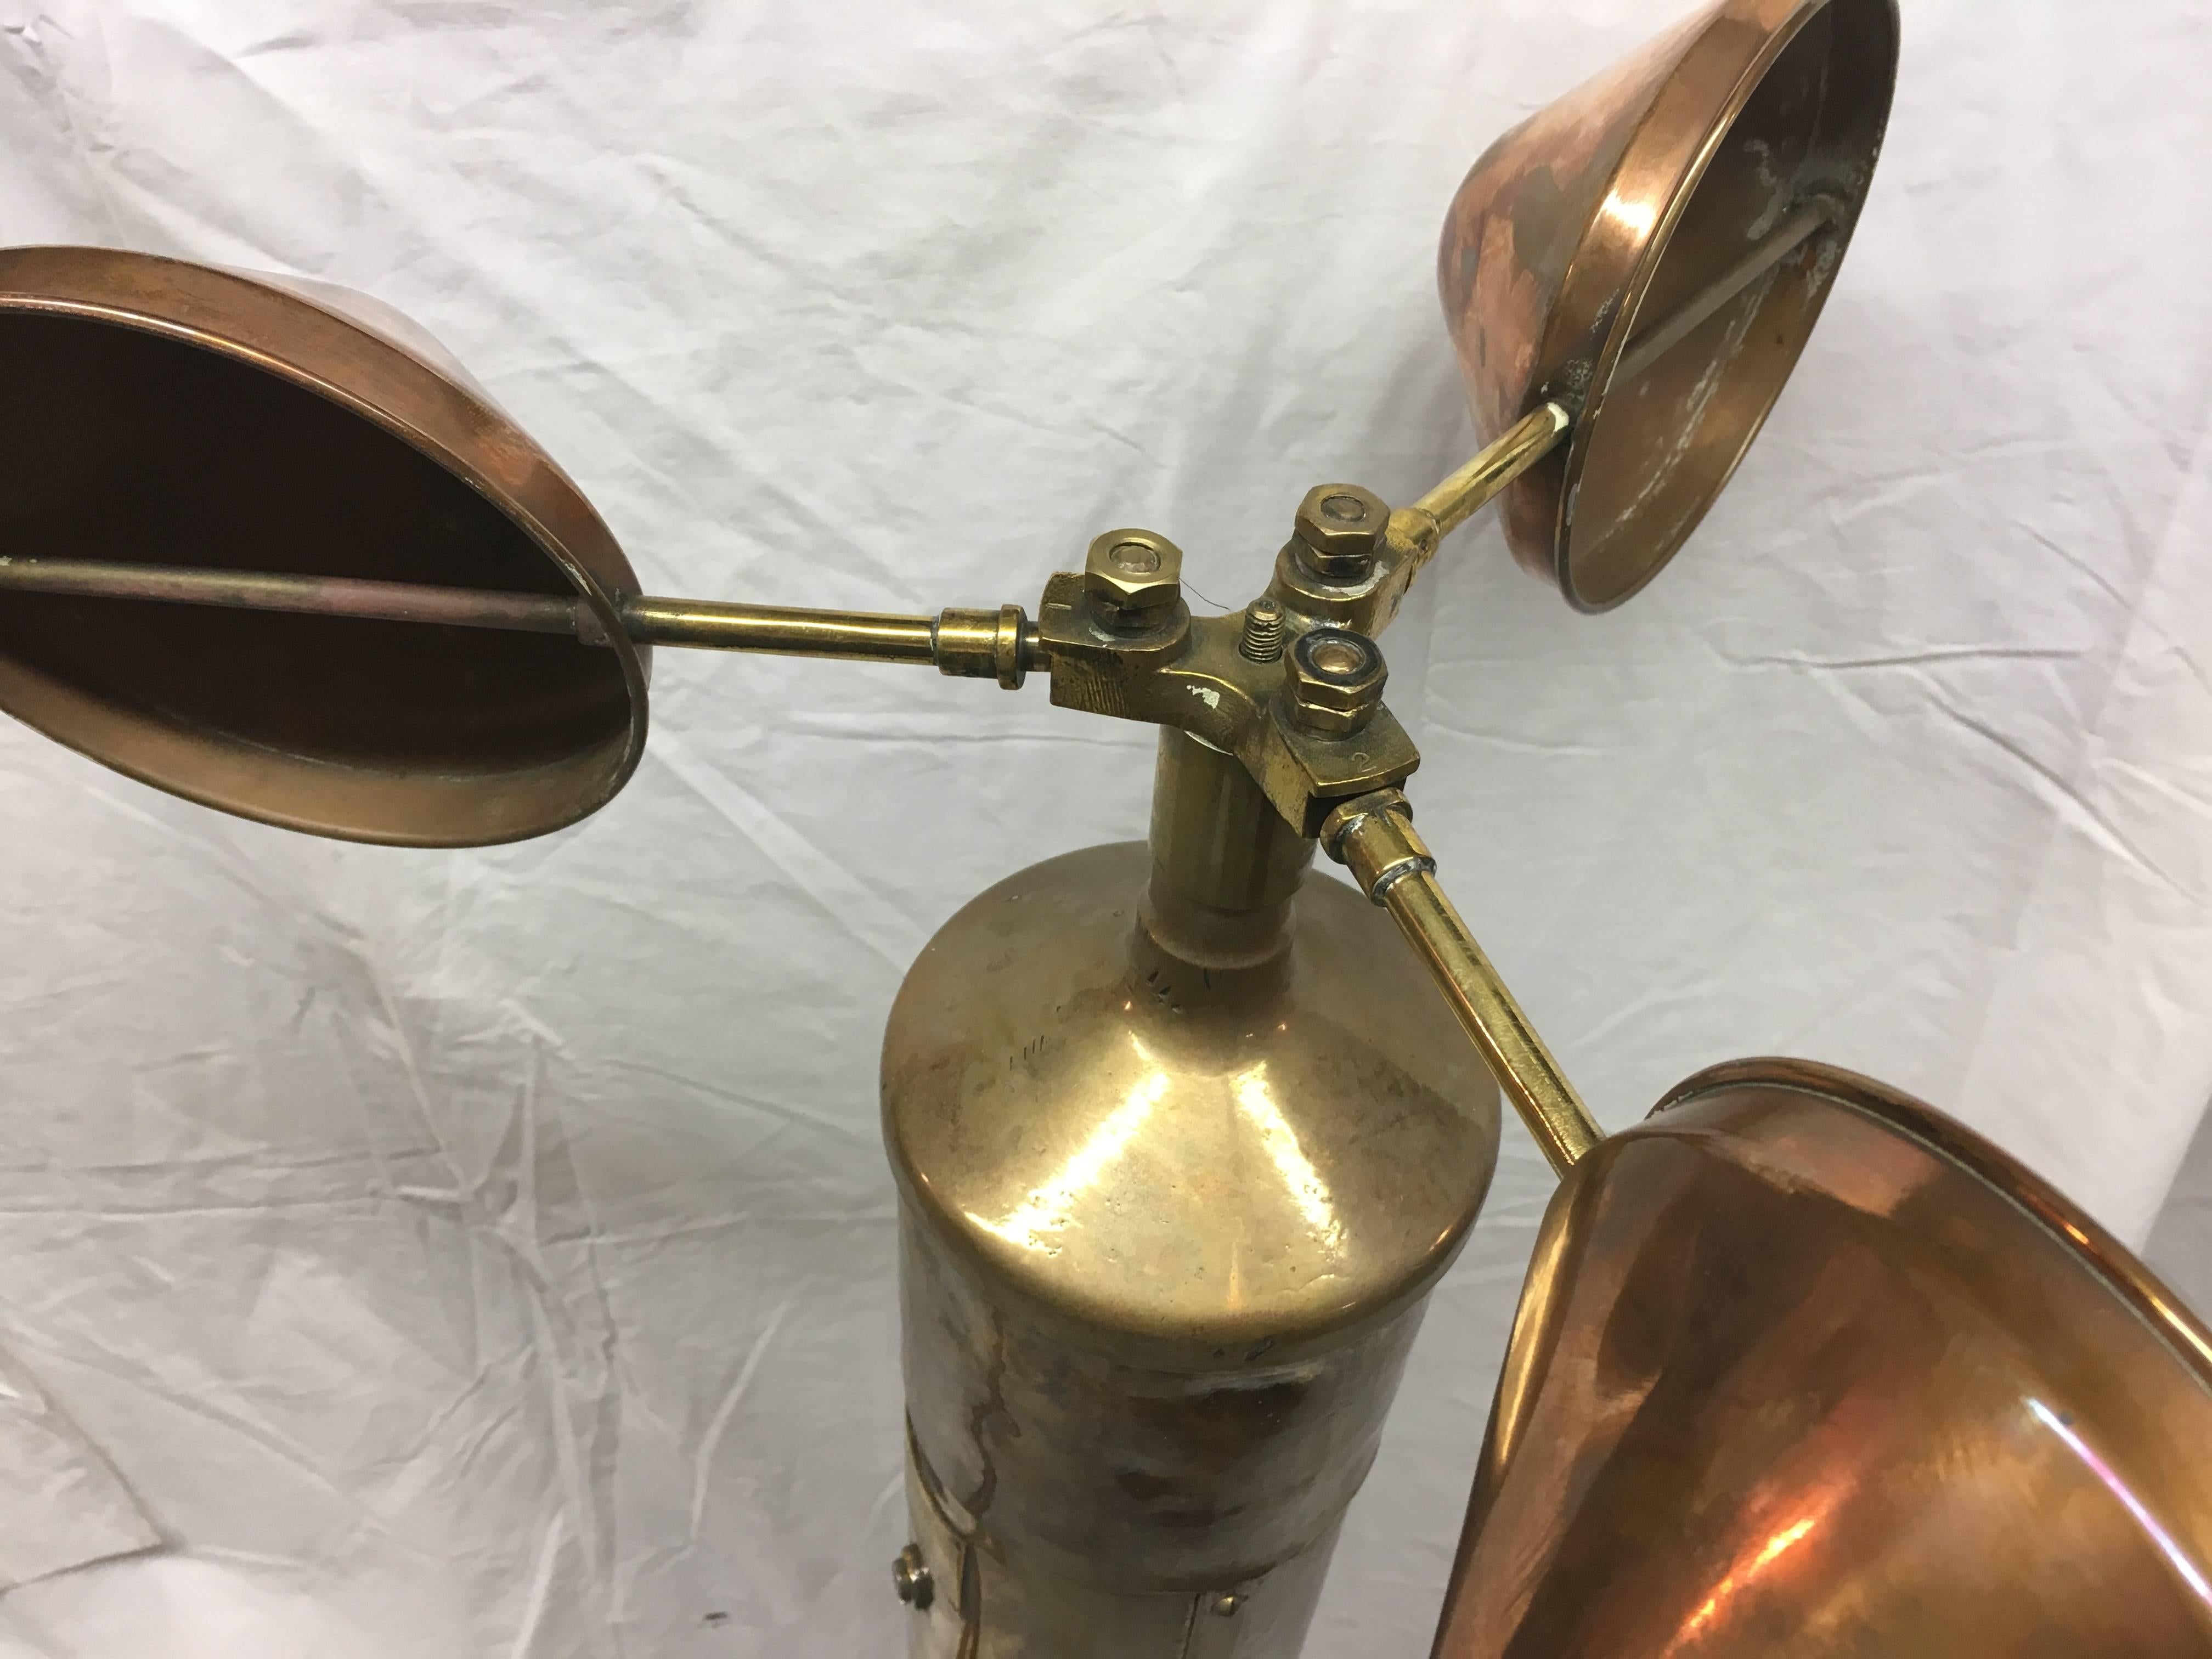 Great Britain (UK) Rare Copper and Brass Ship's Anemometer Signed by Munro from London, 1970s